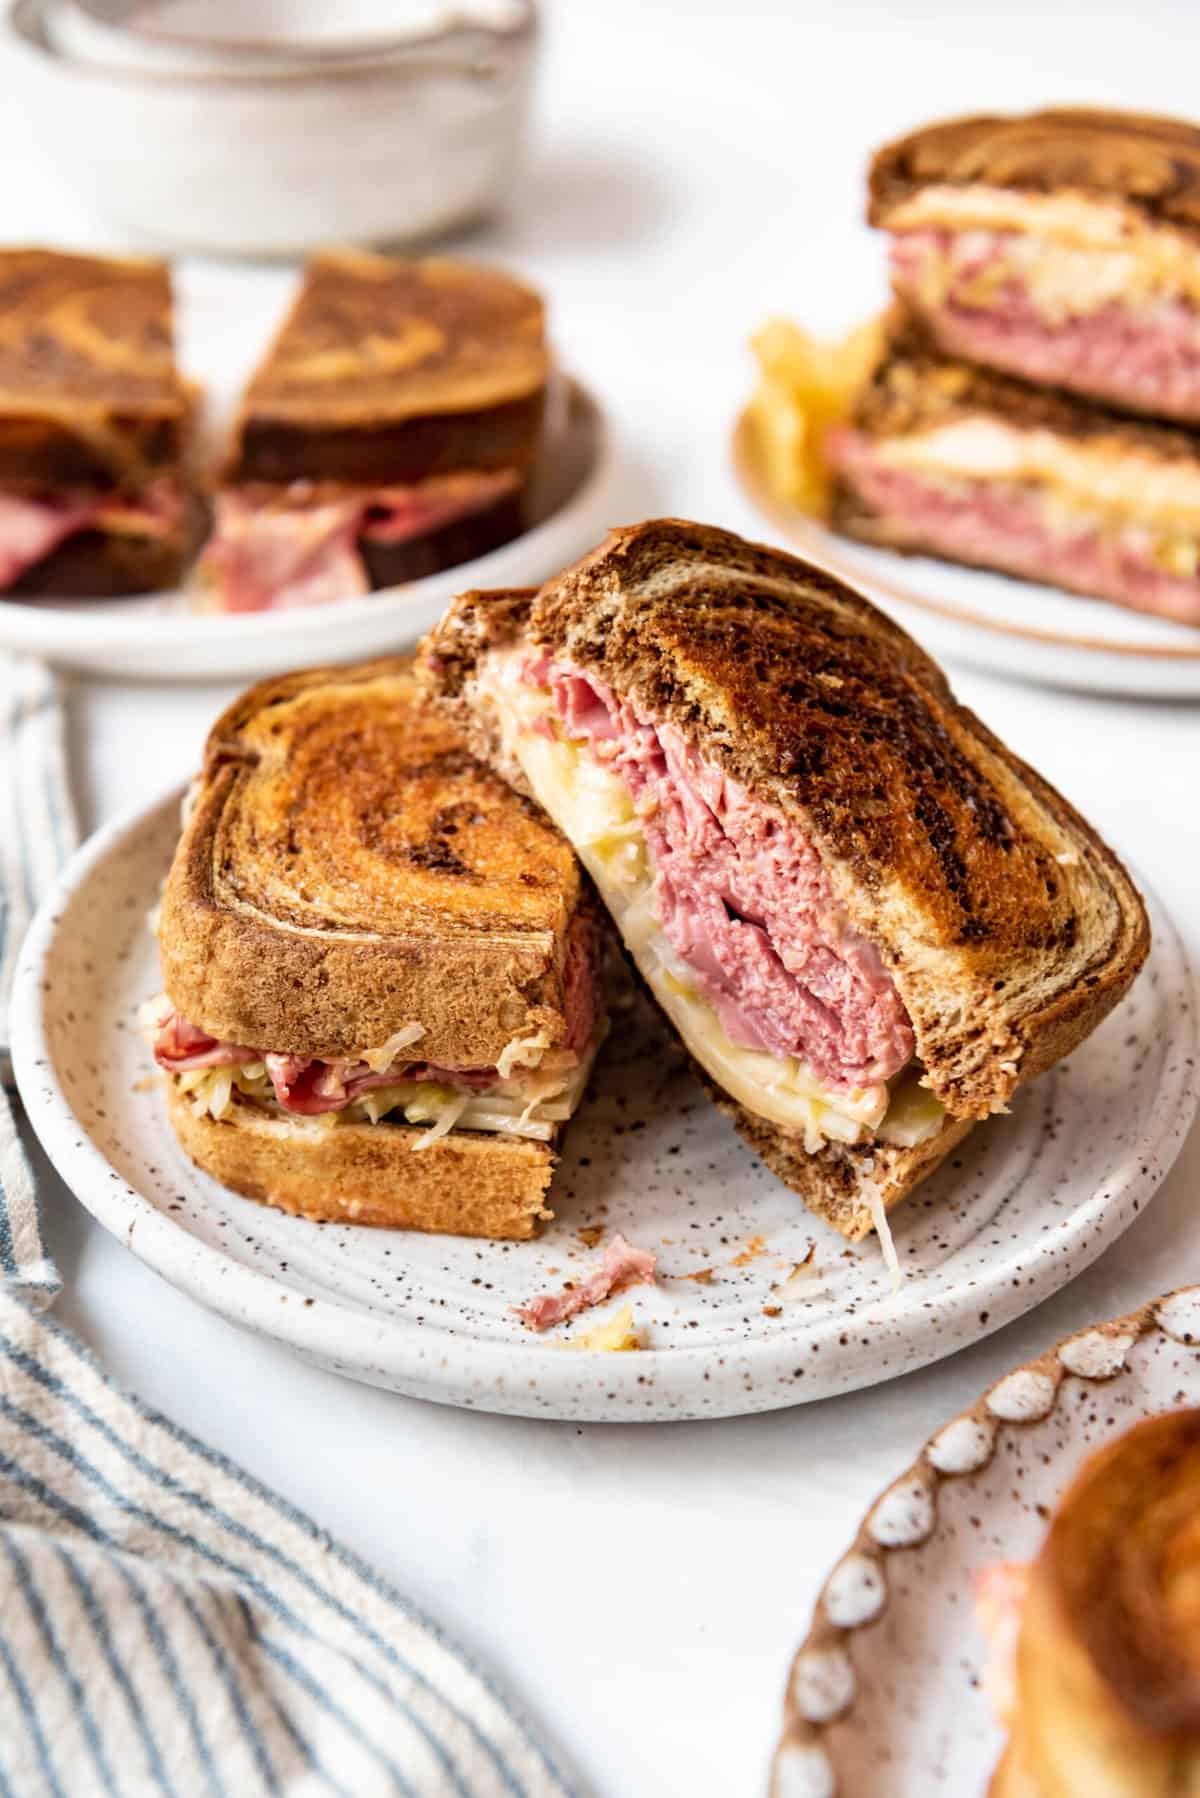 A reuben sandwich that has been sliced in half on a plate with more sandwiches behind them.